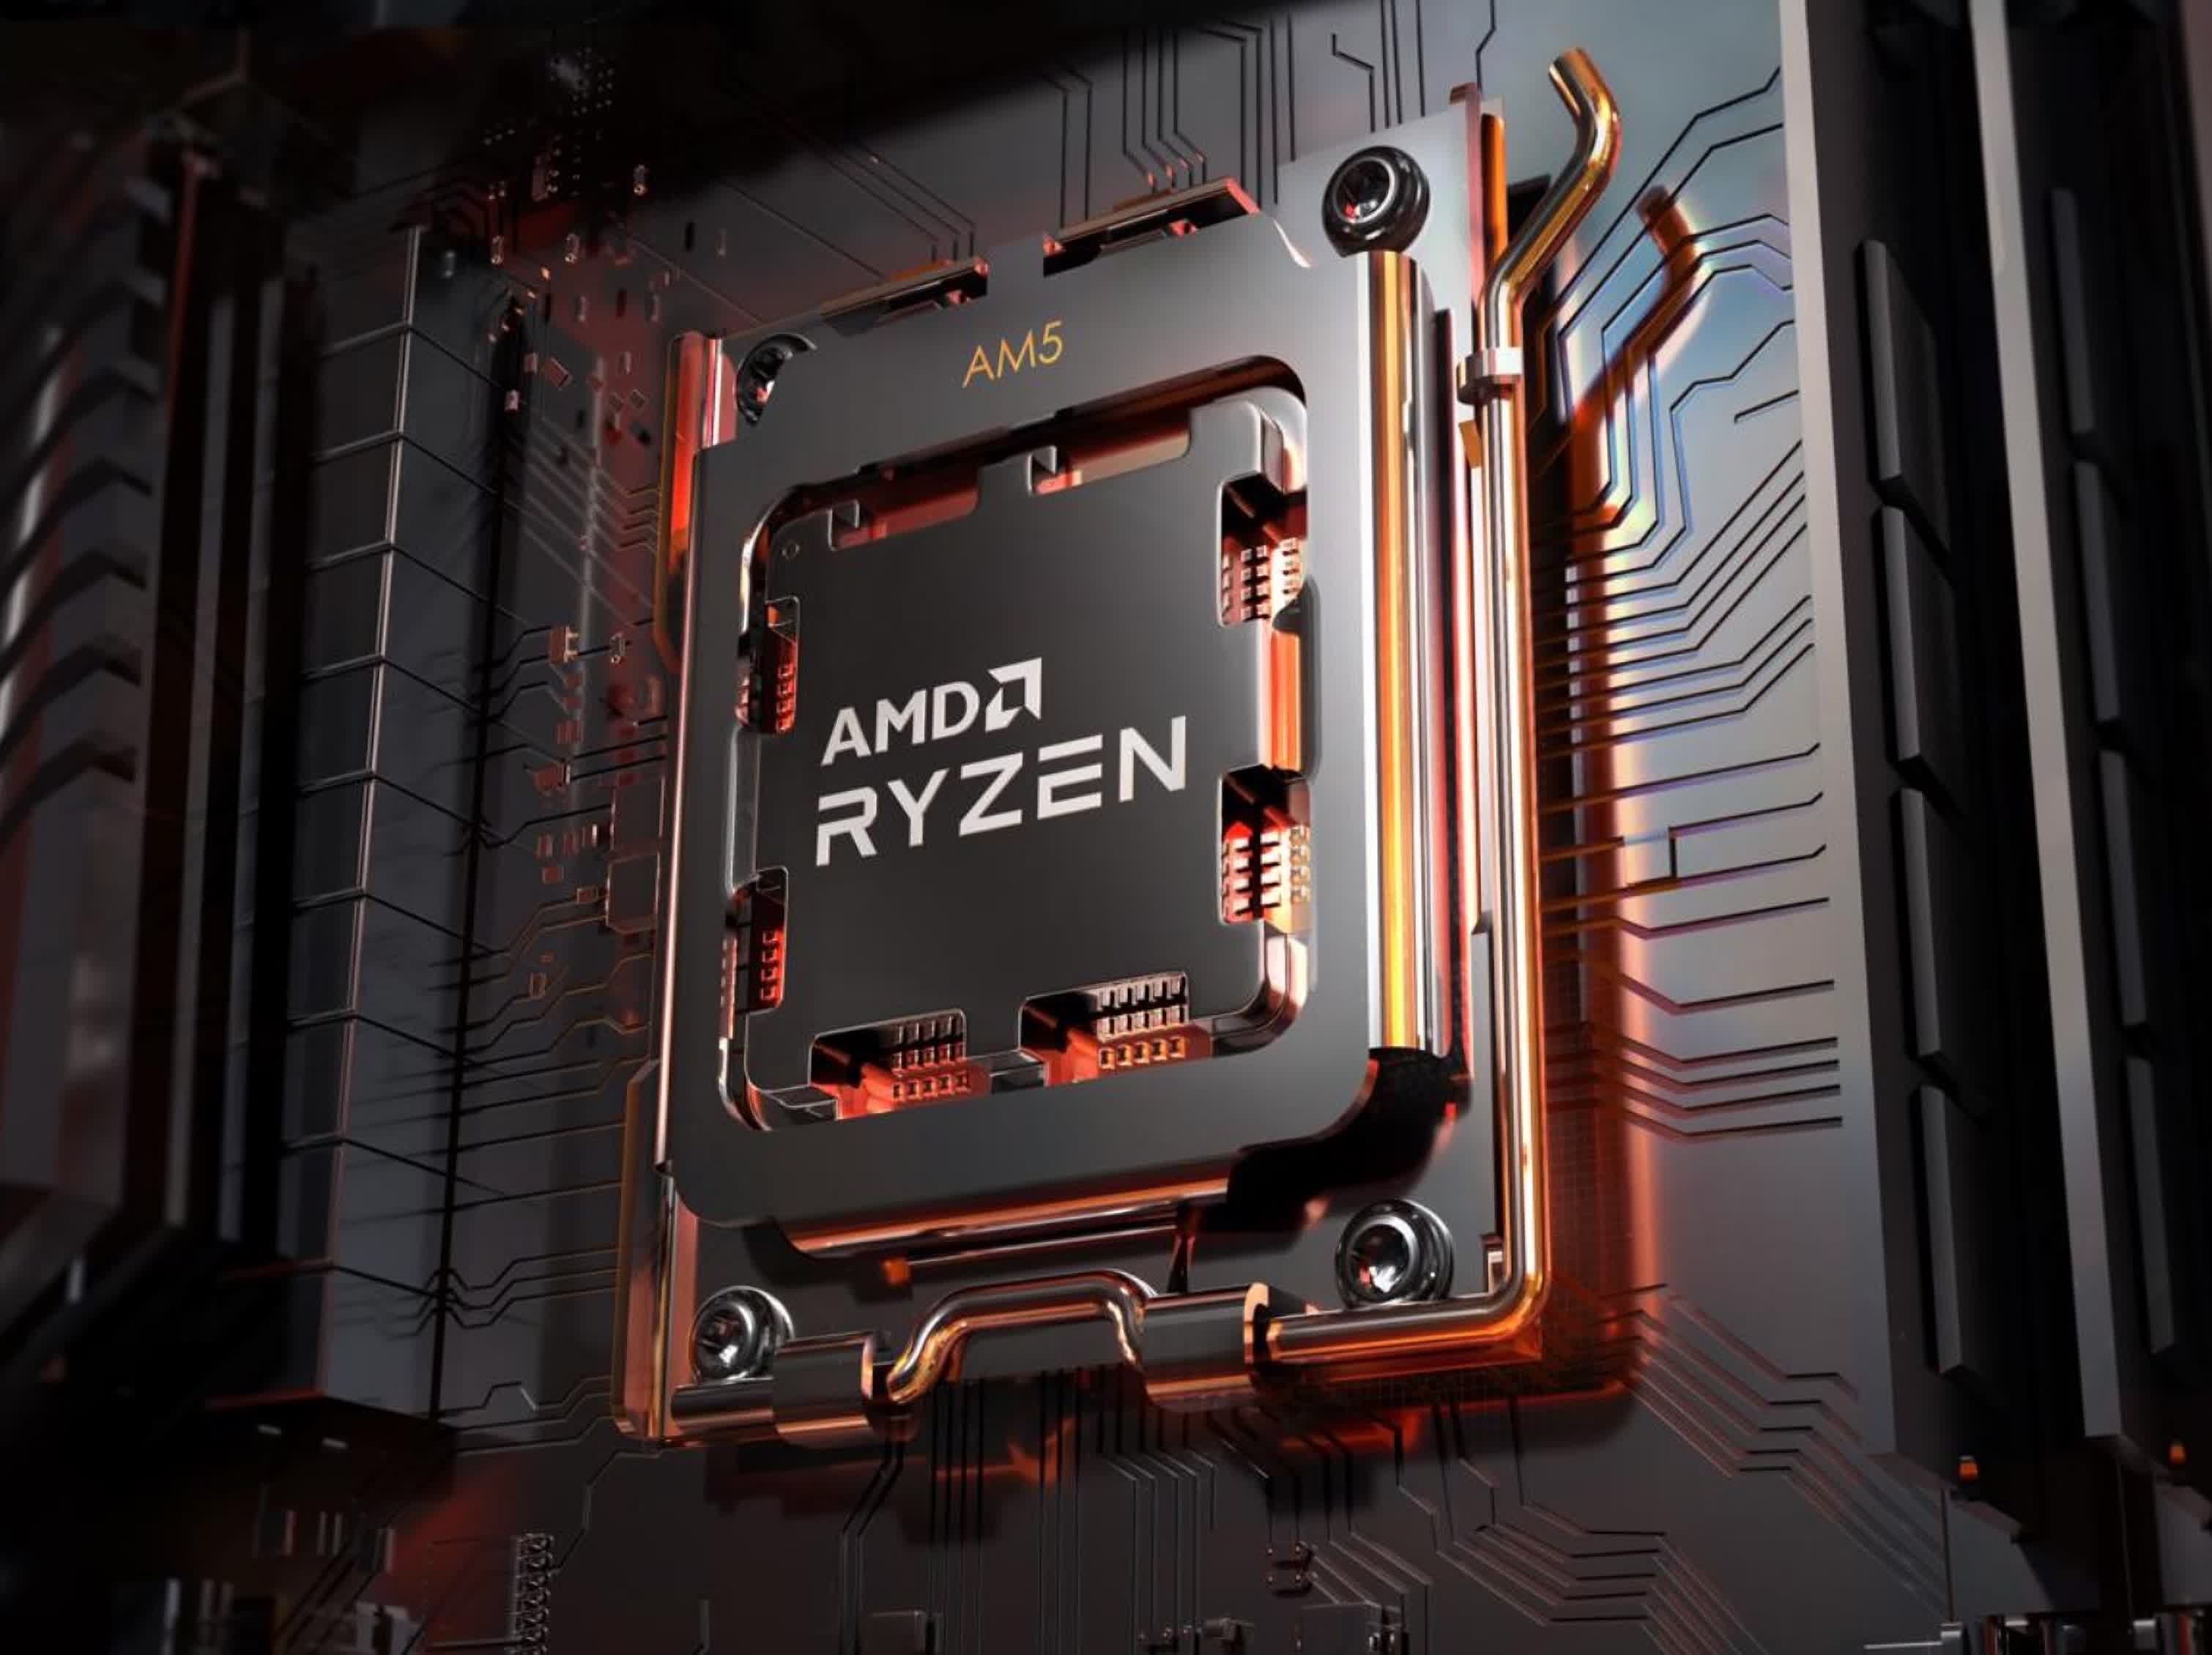 Asus updates warranty policy for AM5 motherboards after Ryzen burnout fiasco